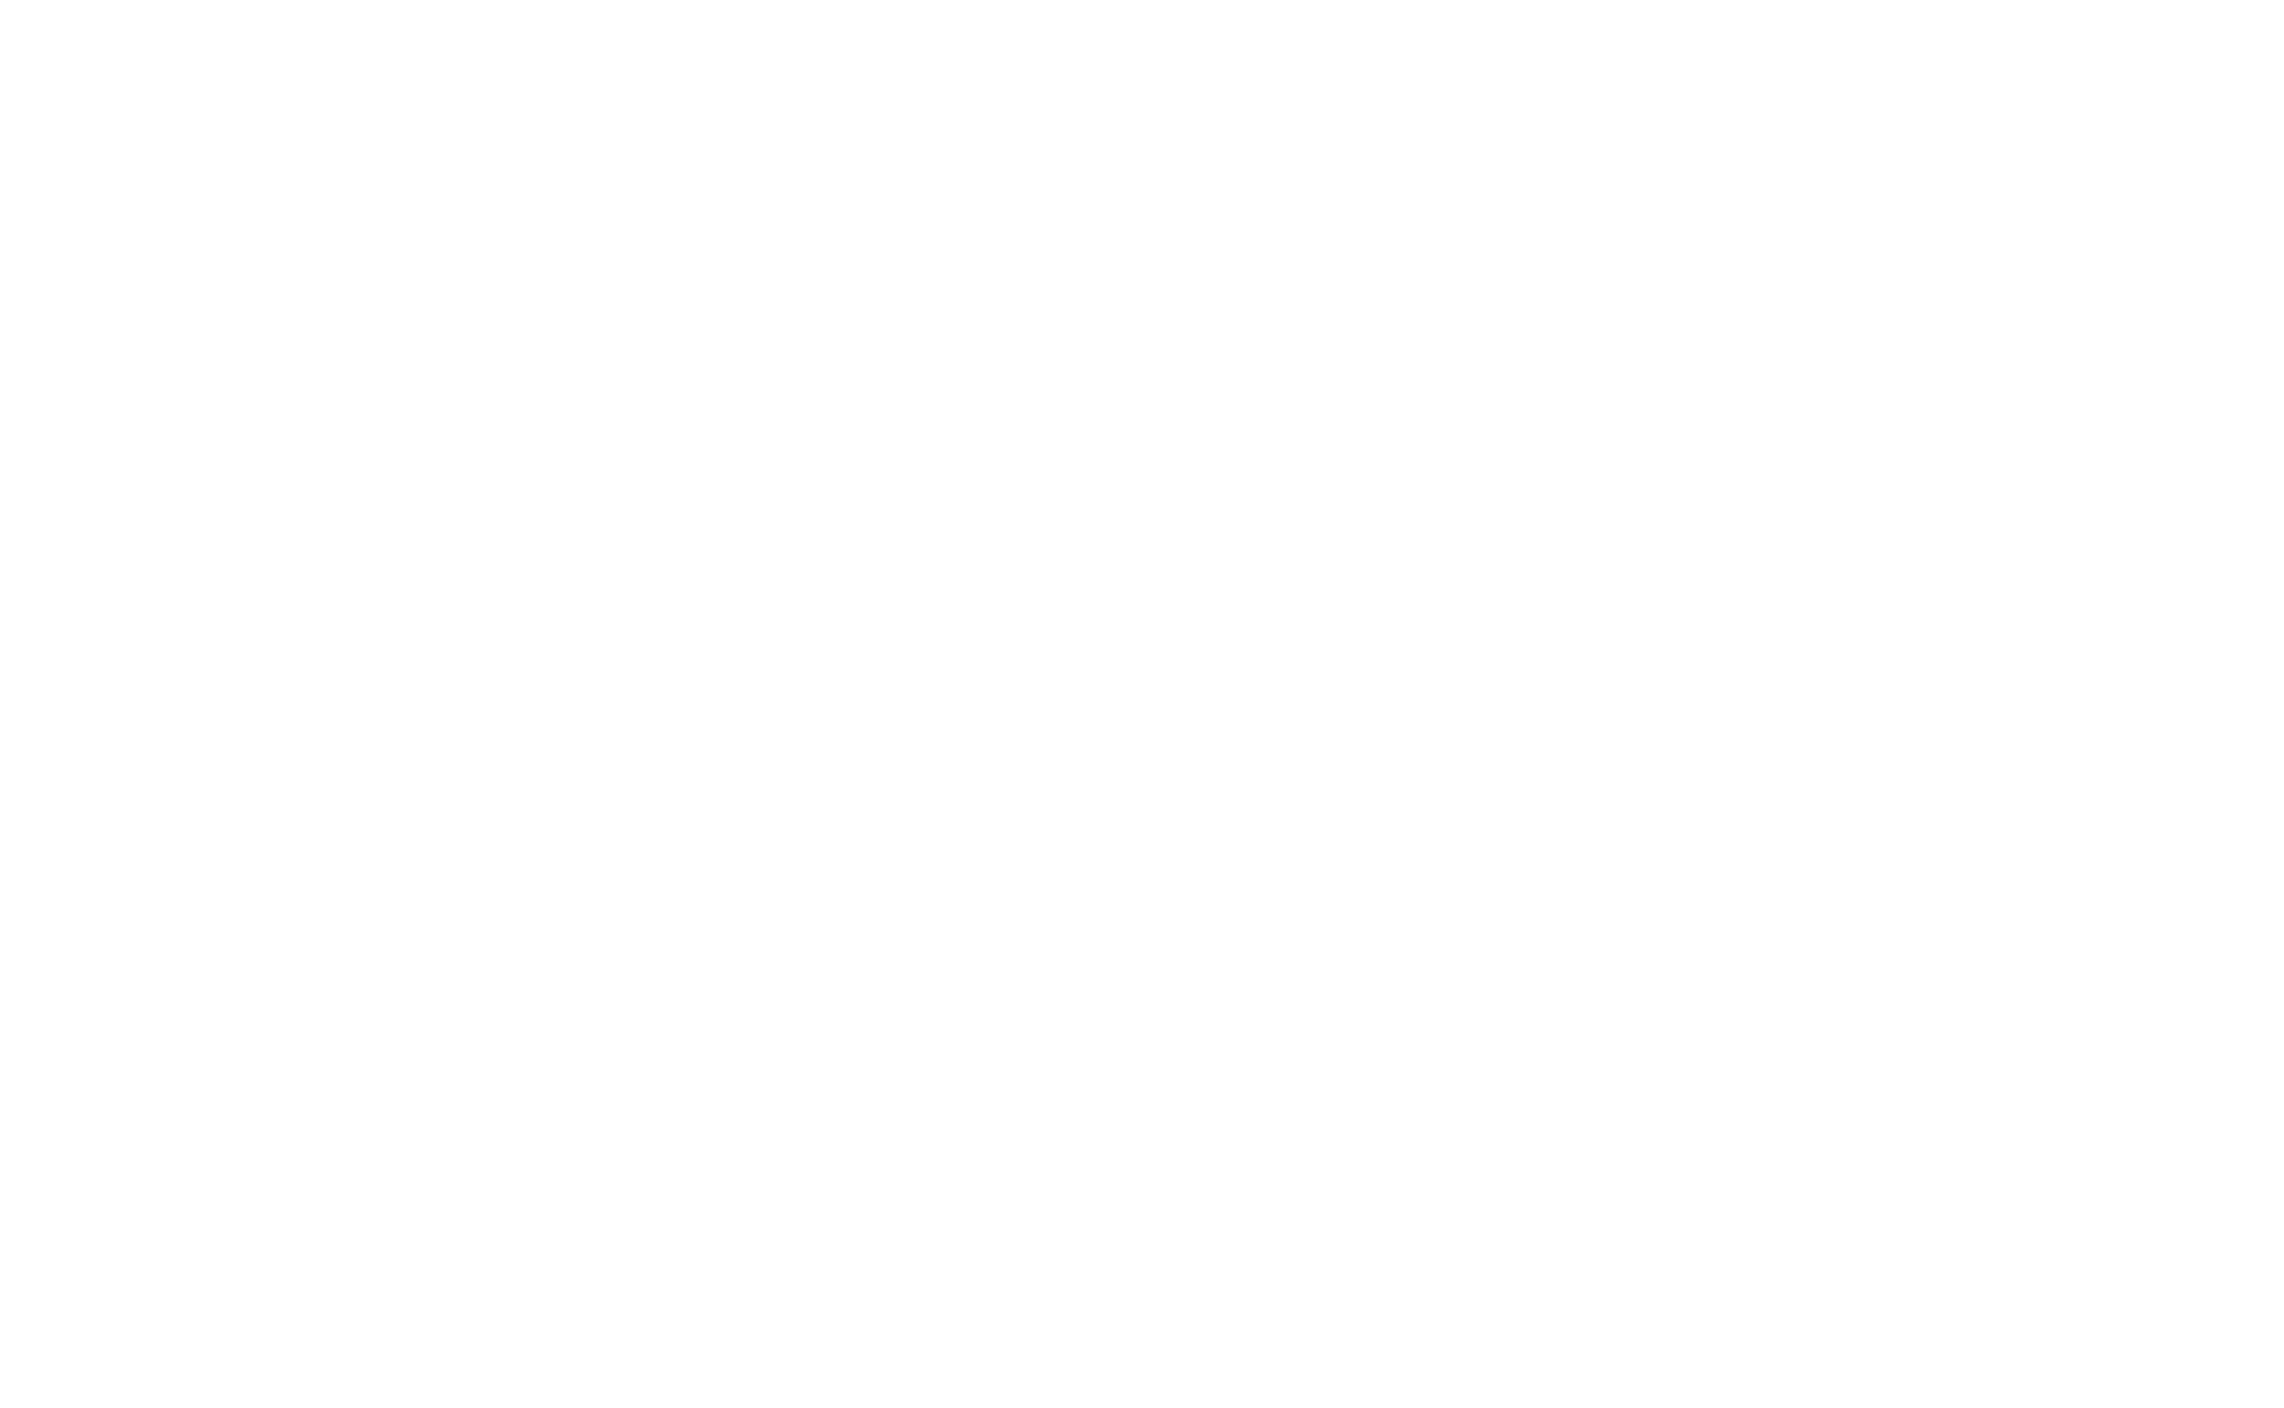 ActionCOACH_LOGO2019_STACKED_W